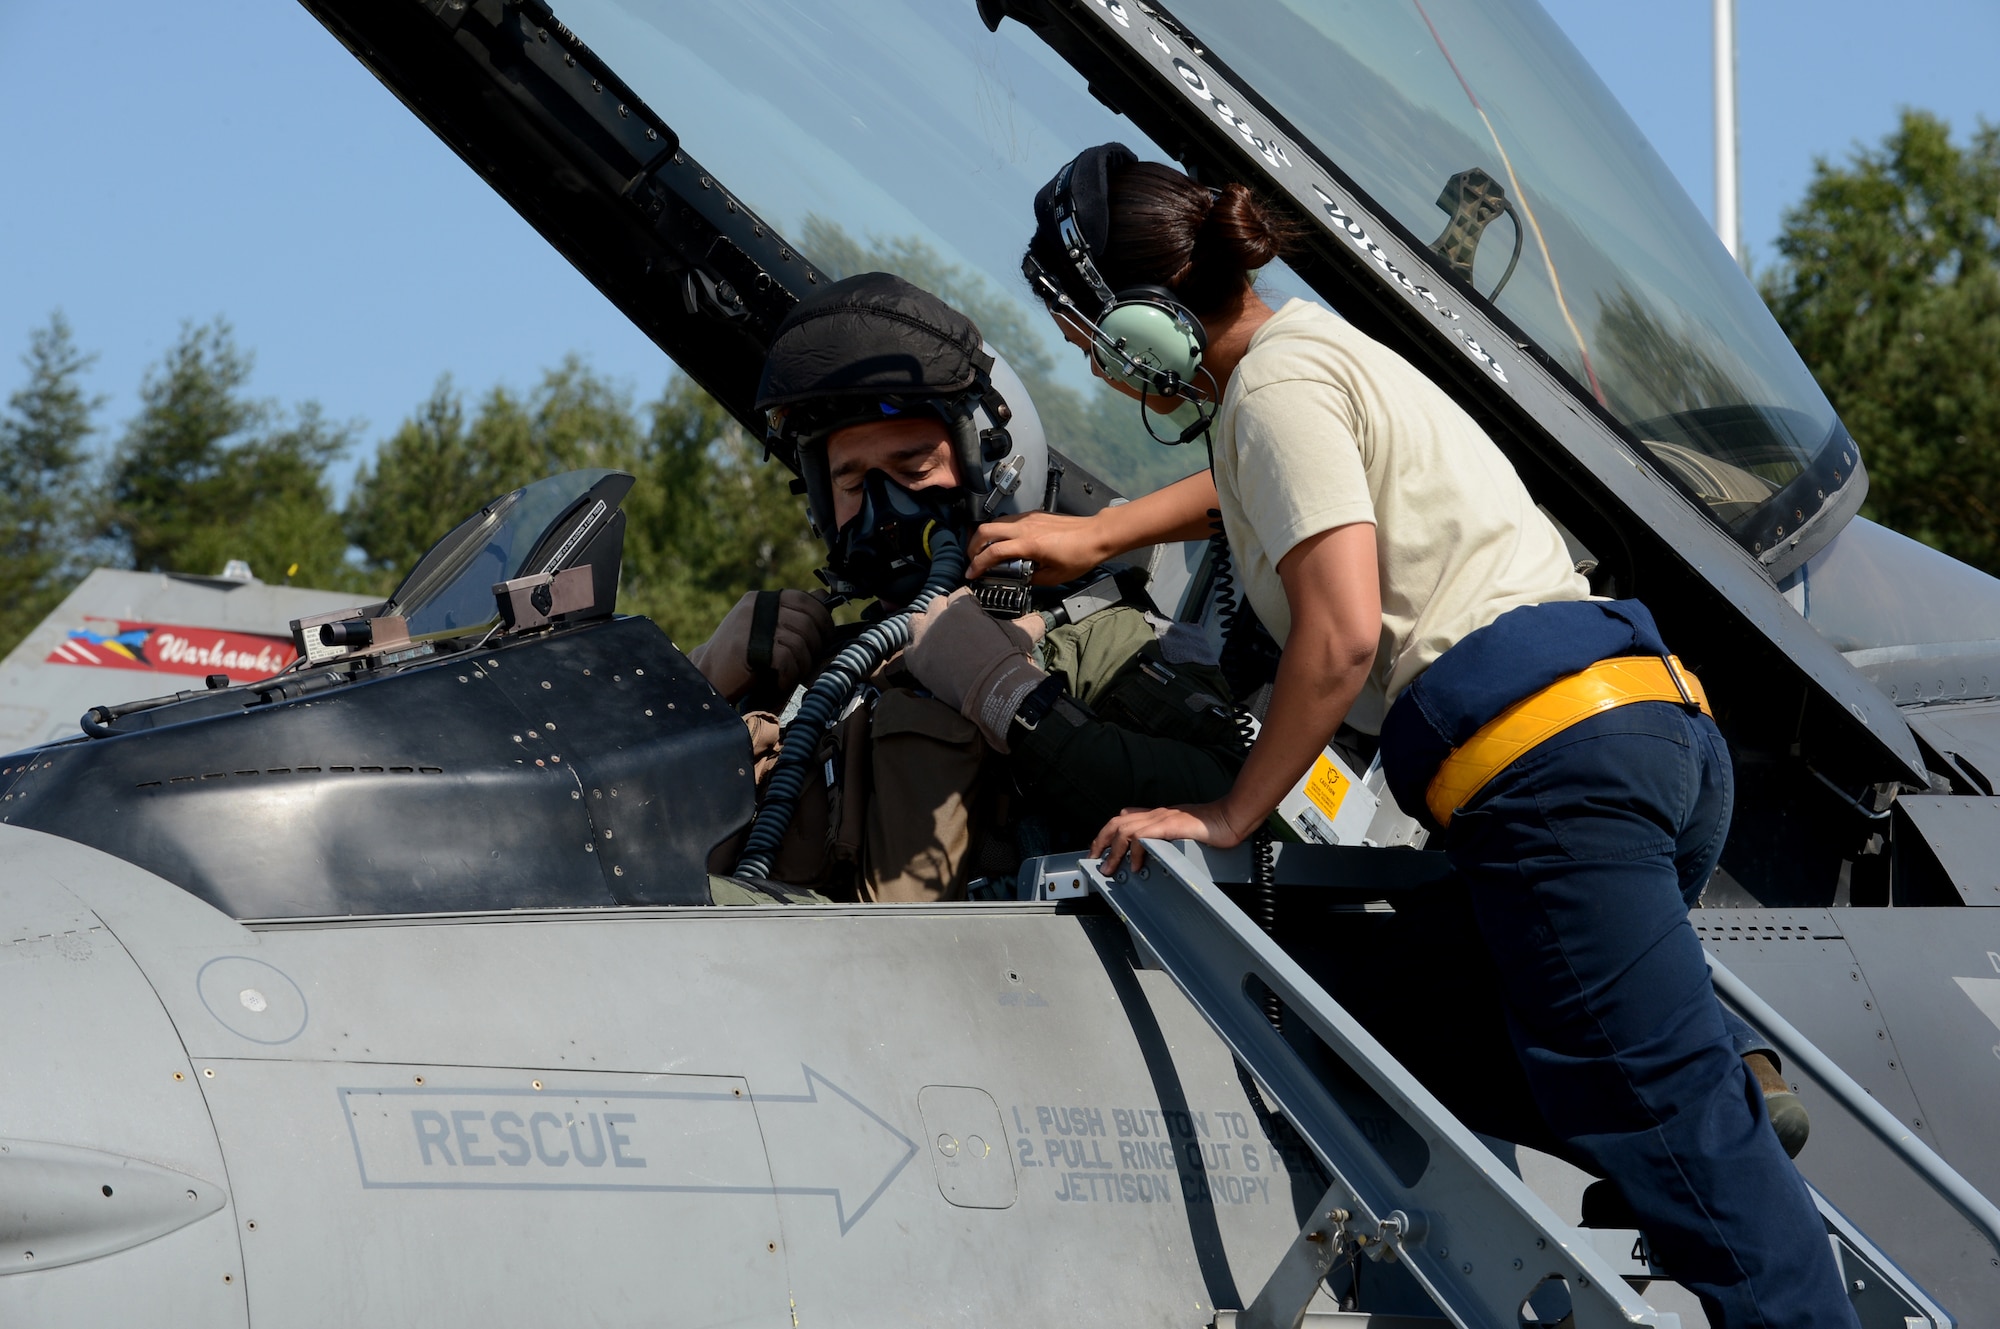 U.S. Air Force Senior Airman Kimberly Szydlowski, a 52nd Aircraft Maintenance Squadron F-16 Fighting Falcon fighter aircraft crew chief from St. Louis, straps in U.S. Air Force Maj. Nathanael Karrs, a 480th Fighter Squadron F-16 pilot from Rocky Mount, N.C., at Lask Air Base, Poland, June 9, 2014. Karrs trained with NATO partners from the United Kingdom, France and Poland in the Polish-led exercise EAGLE TALON. Exercises such as these help develop and improve a ready air force between NATO partners for future operations. (U.S. Air Force photo by Airman 1st Class Kyle Gese/Released)